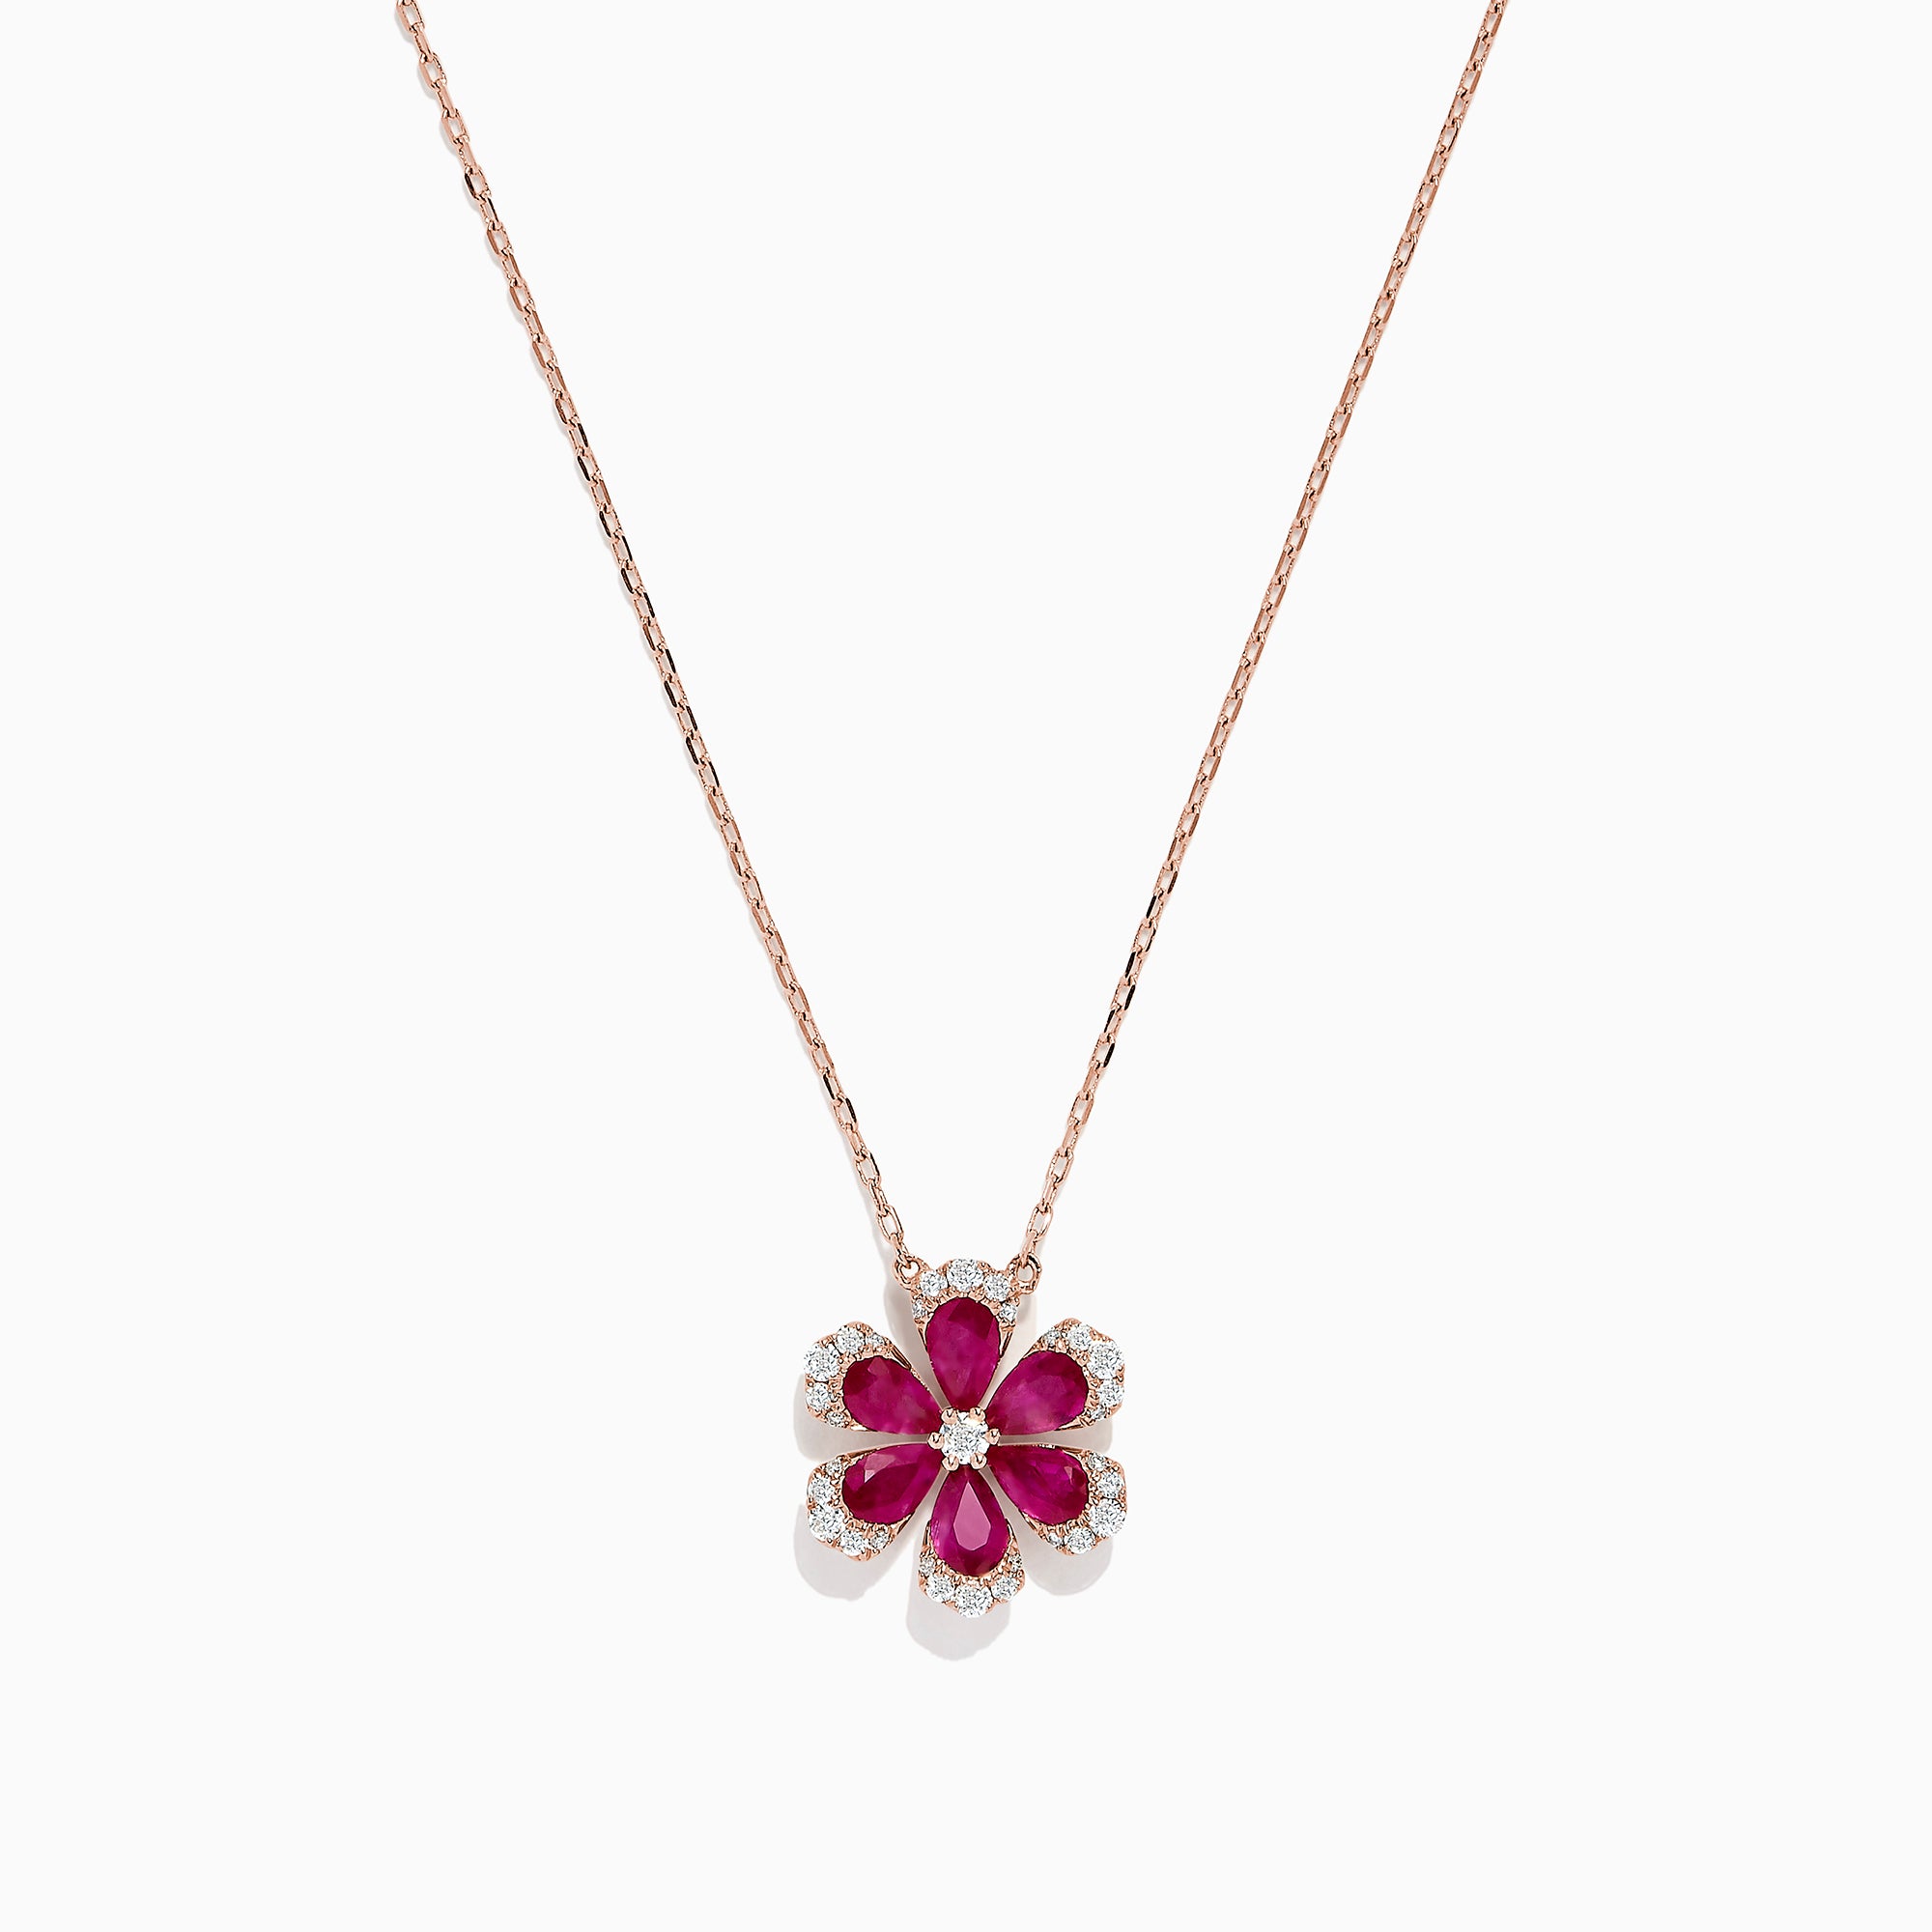 Compare prices for Color Blossom Necklace, Pink Gold, Pink Mother